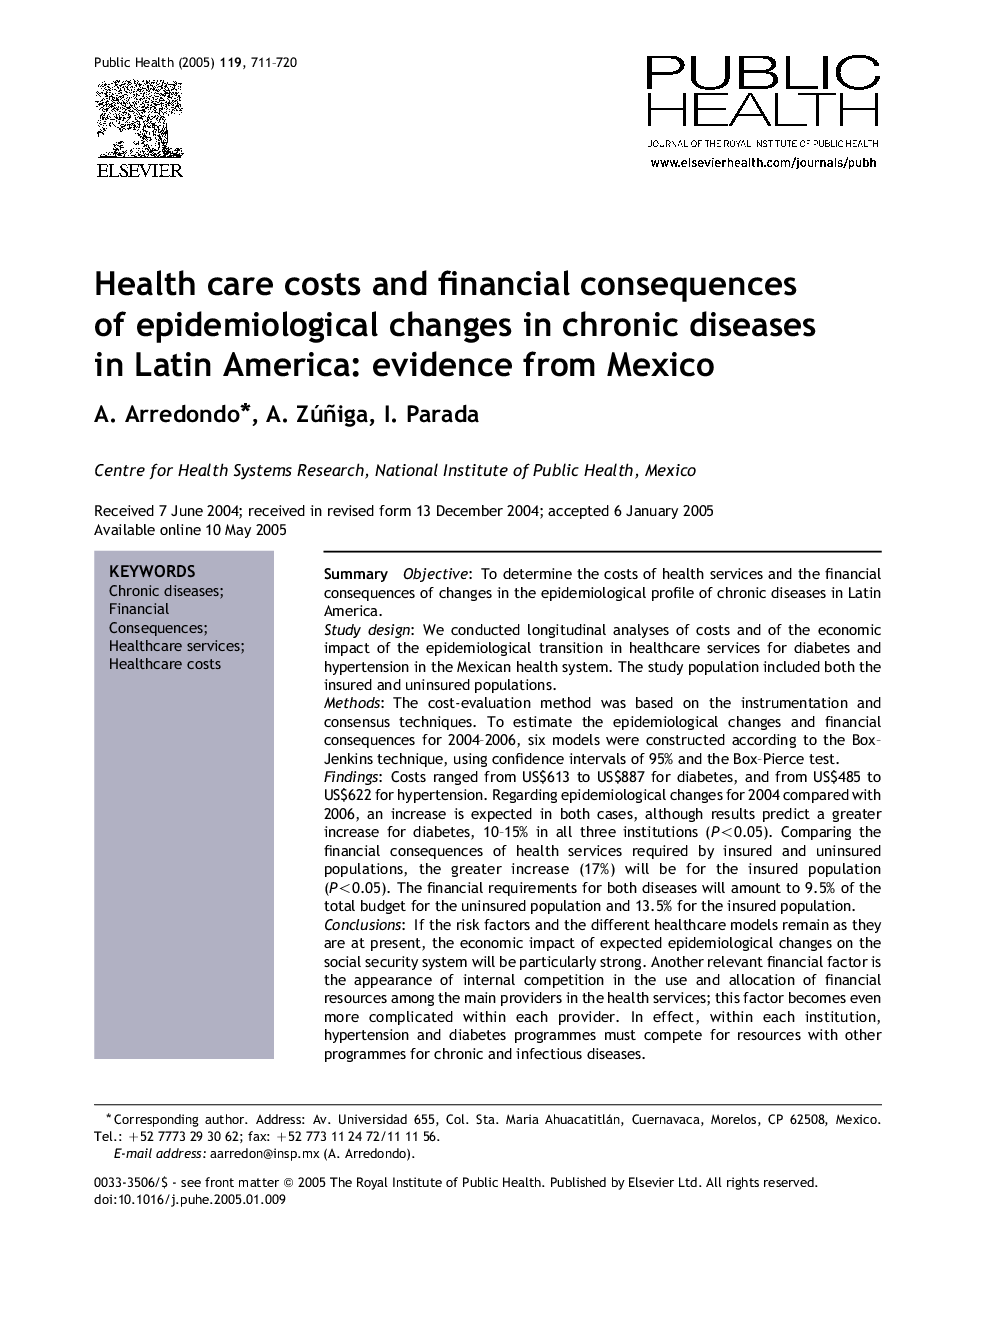 Health care costs and financial consequences of epidemiological changes in chronic diseases in Latin America: evidence from Mexico